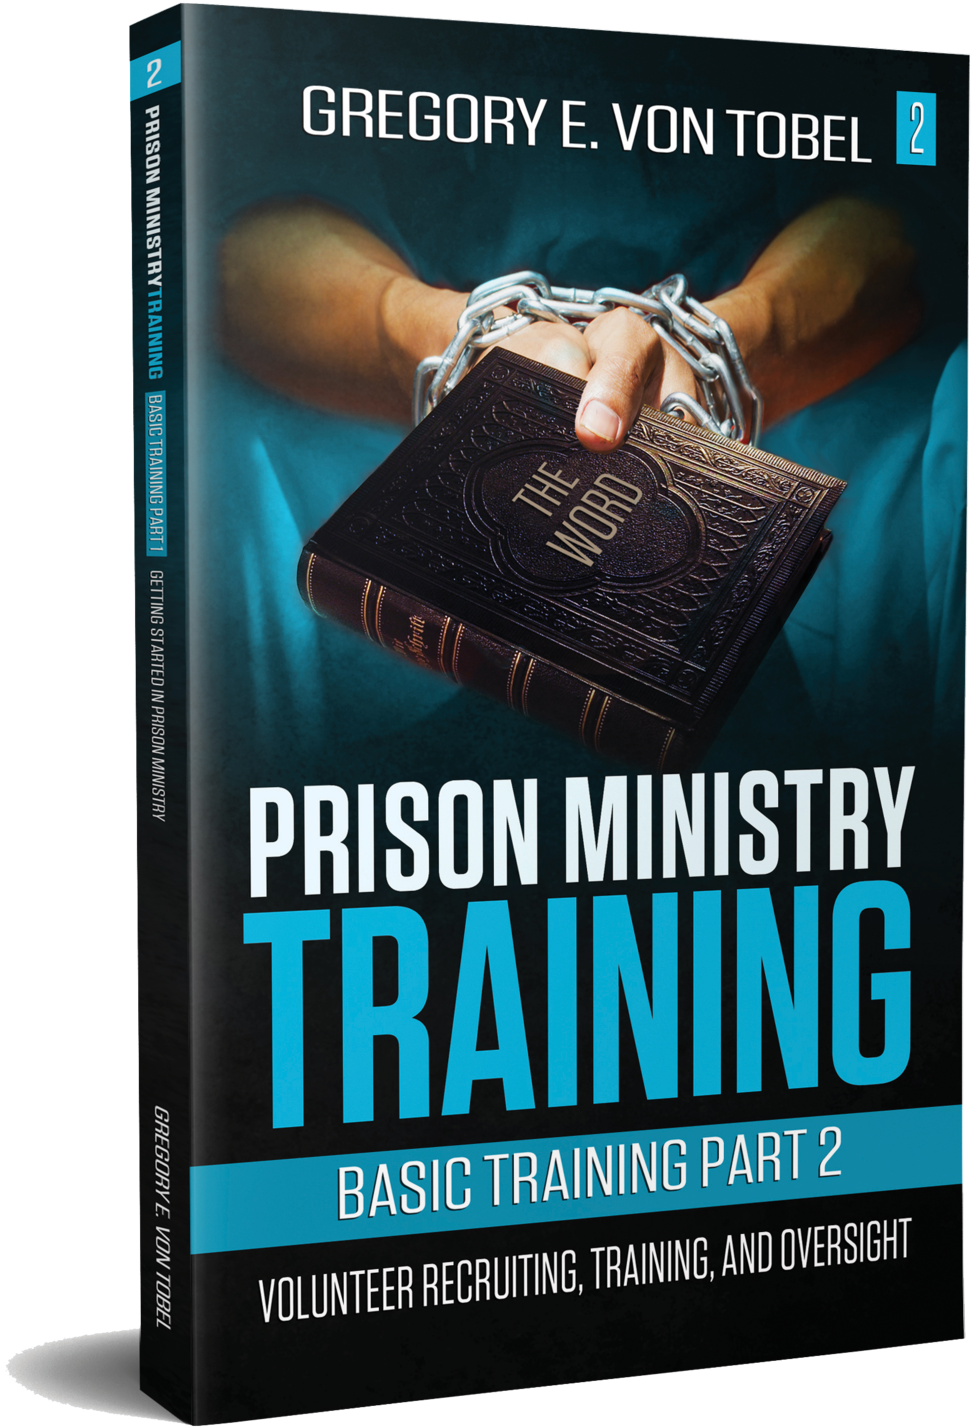 Prison Ministry Training Book Cover PNG